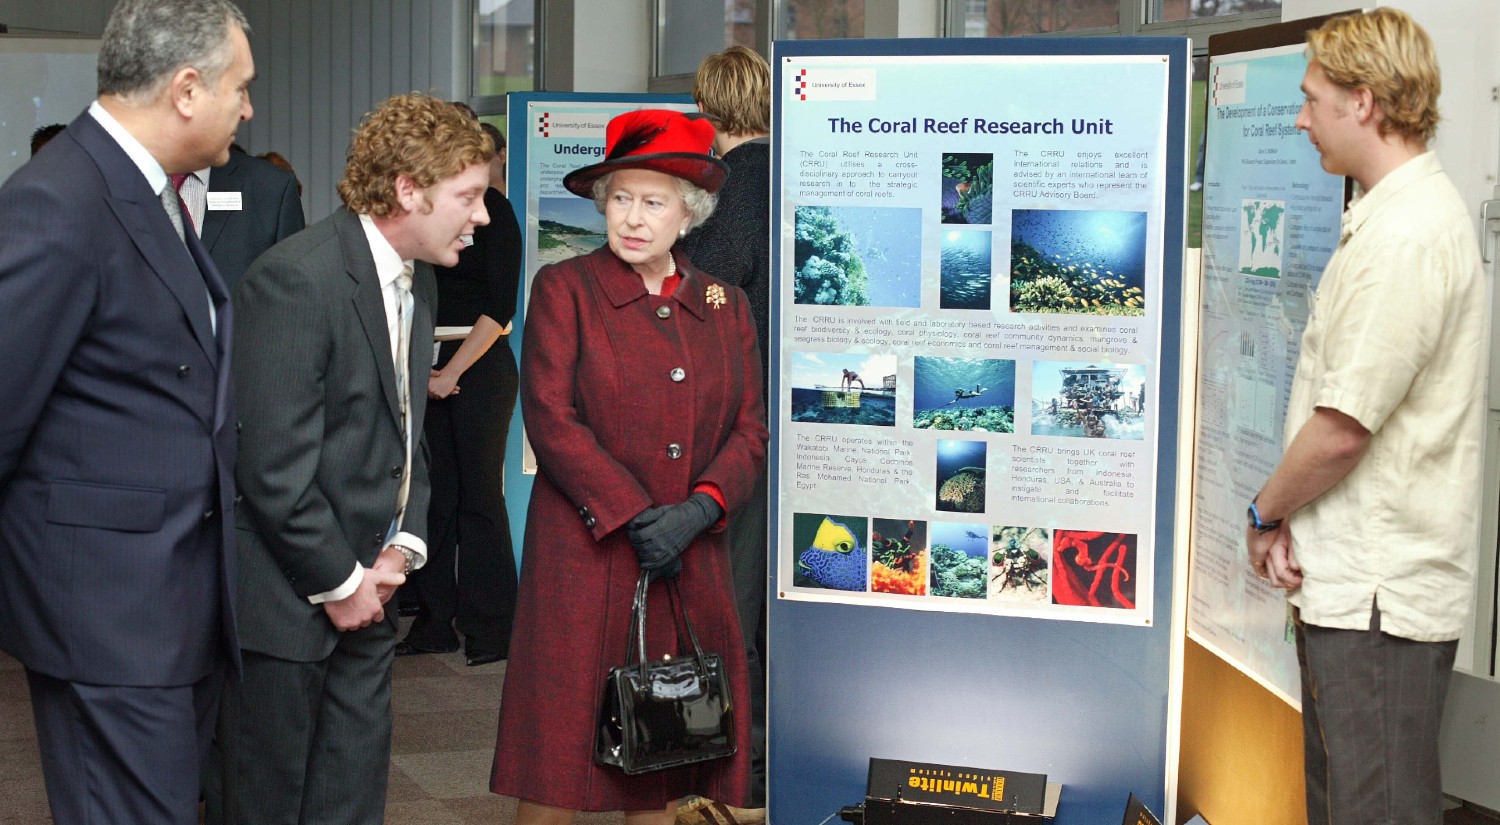 Her Majesty the Queen meets Professor Dave Smith